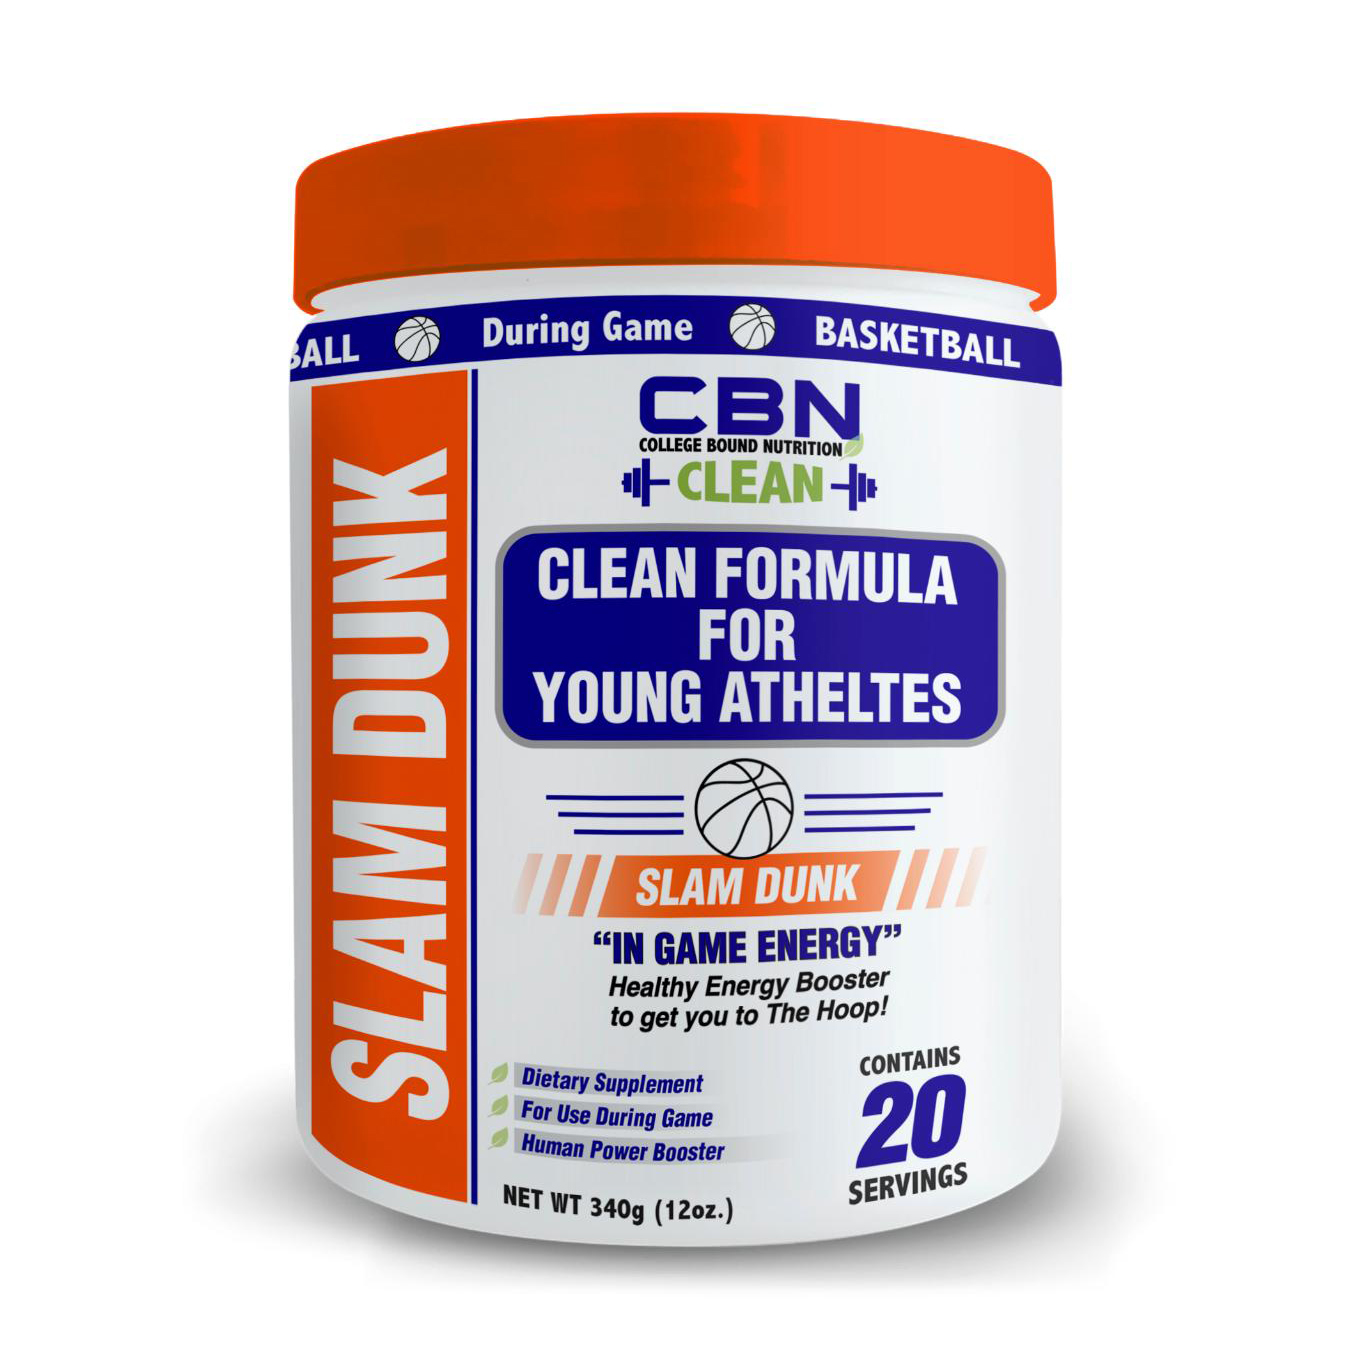 Best Vitamins for Youth Male Athletes, Best Vitamins for Basketball Players, Best Creatine for Basketball Players, Best Supplements for AAU Basketball Players, Best Supplements for Basketball Performance, Best Protein for Basketball Players,